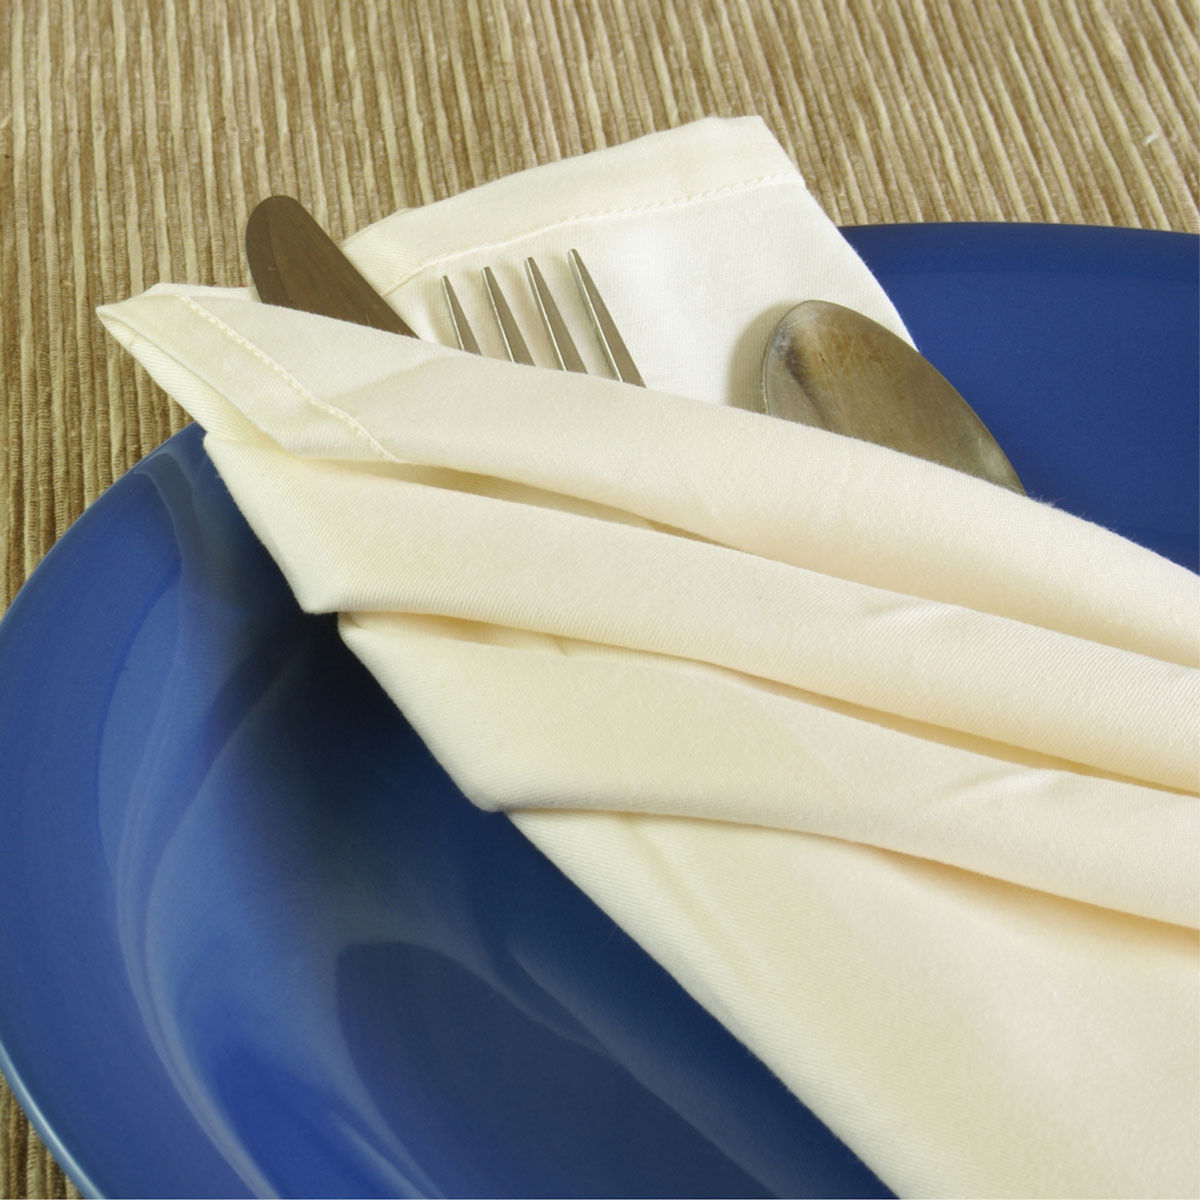 What are the dimensions and finish of the Infinity Spun Polyester Fabric Wholesale Napkins?